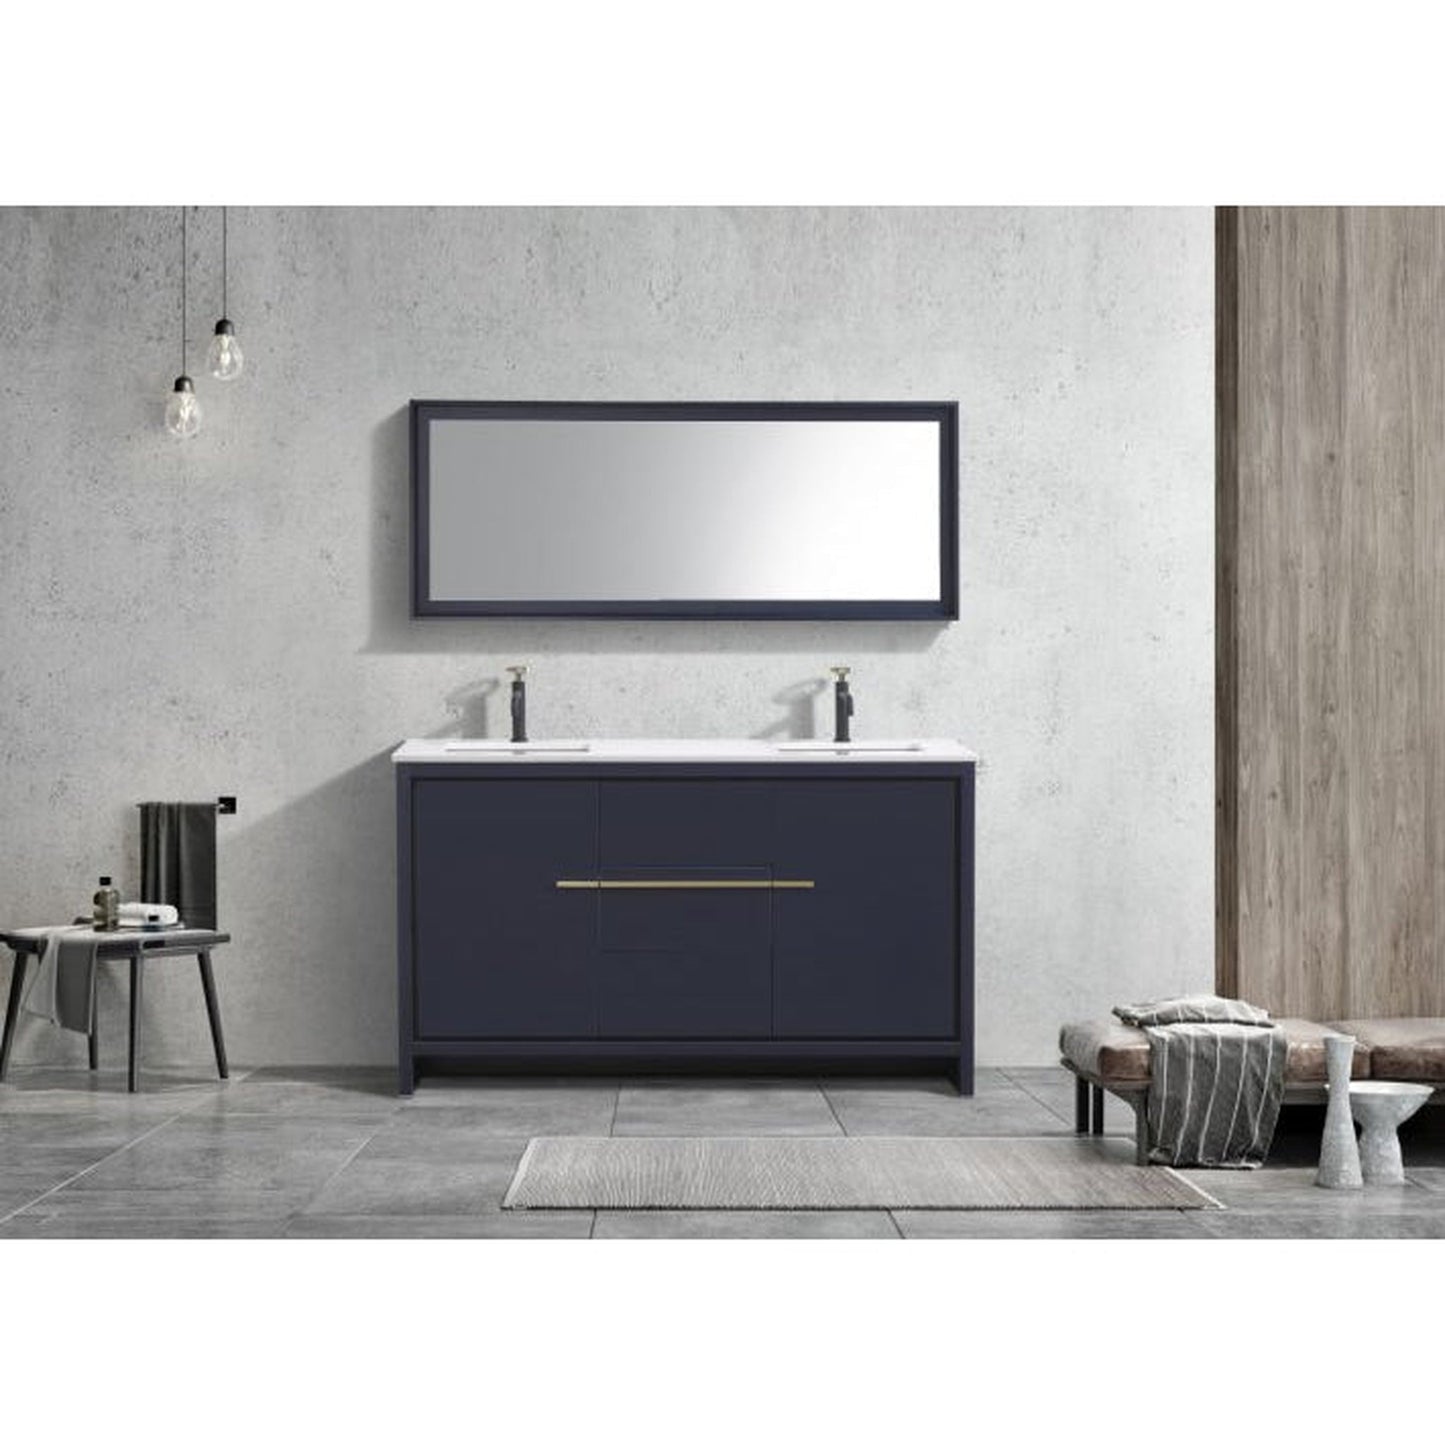 KubeBath Dolce 60" Blue Freestanding Modern Bathroom Vanity With Quartz Vanity Top & Ceramic Double Sink With Overflow and 60" White Framed Mirror With Shelf